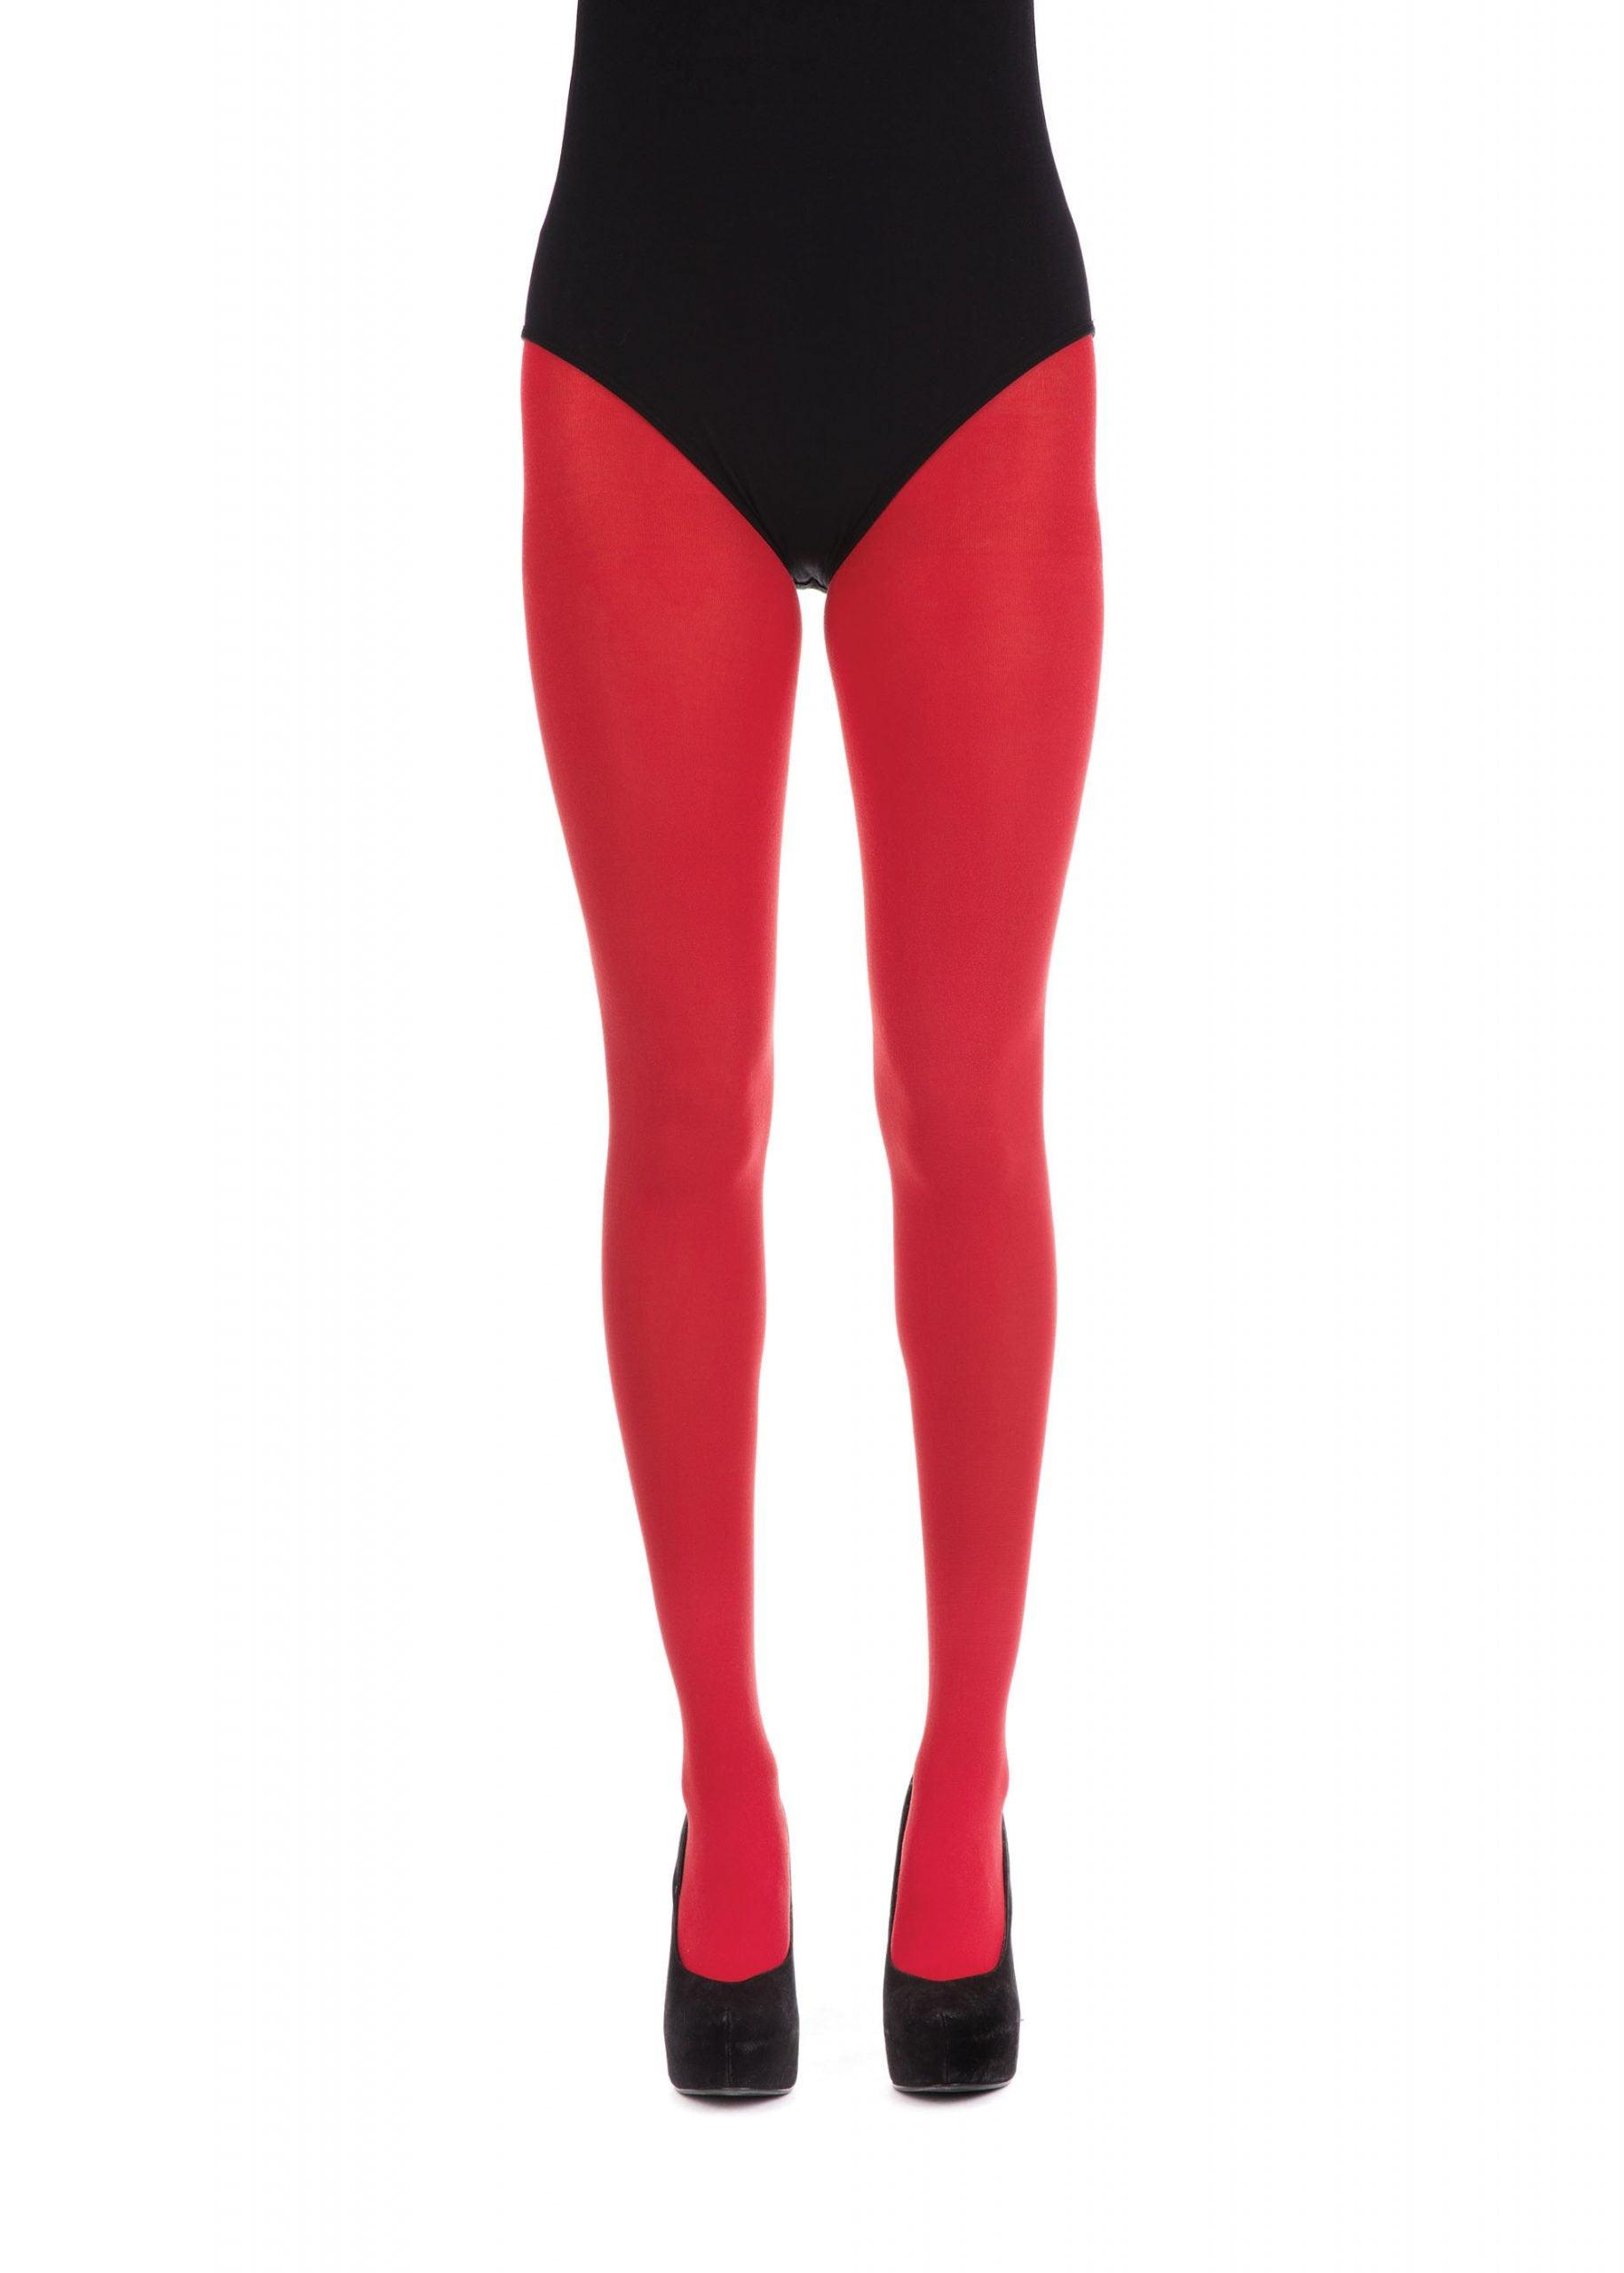 Ladies Womens Coloured Fashion Opaque Tights in red - Labreeze